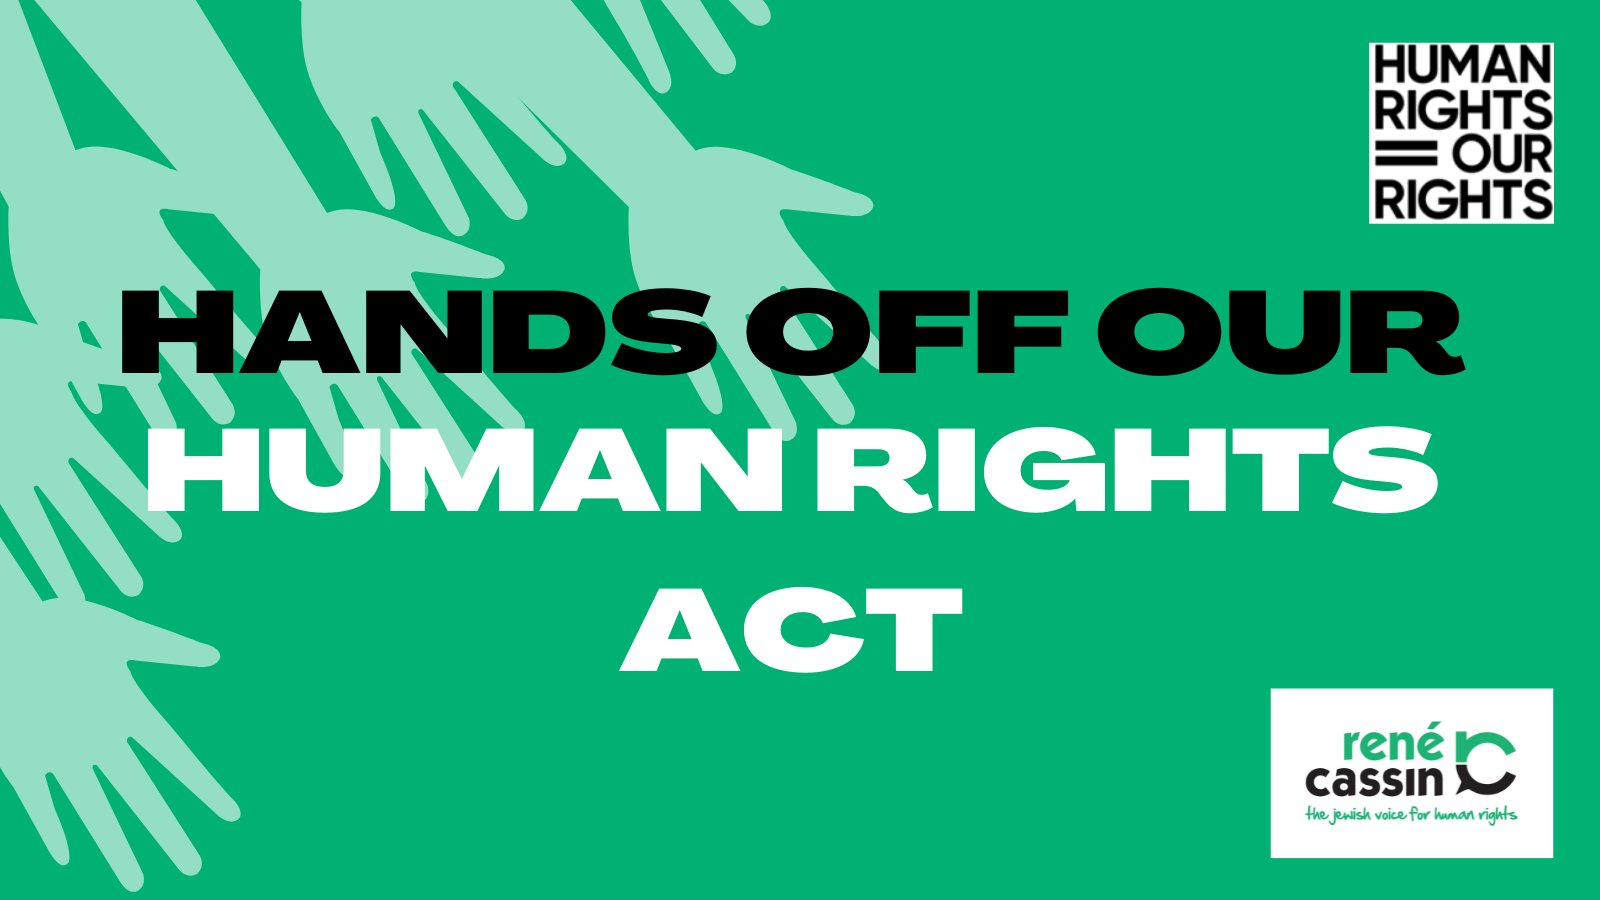 The UK Jewish community says “Hands off our Human Rights Act!” The